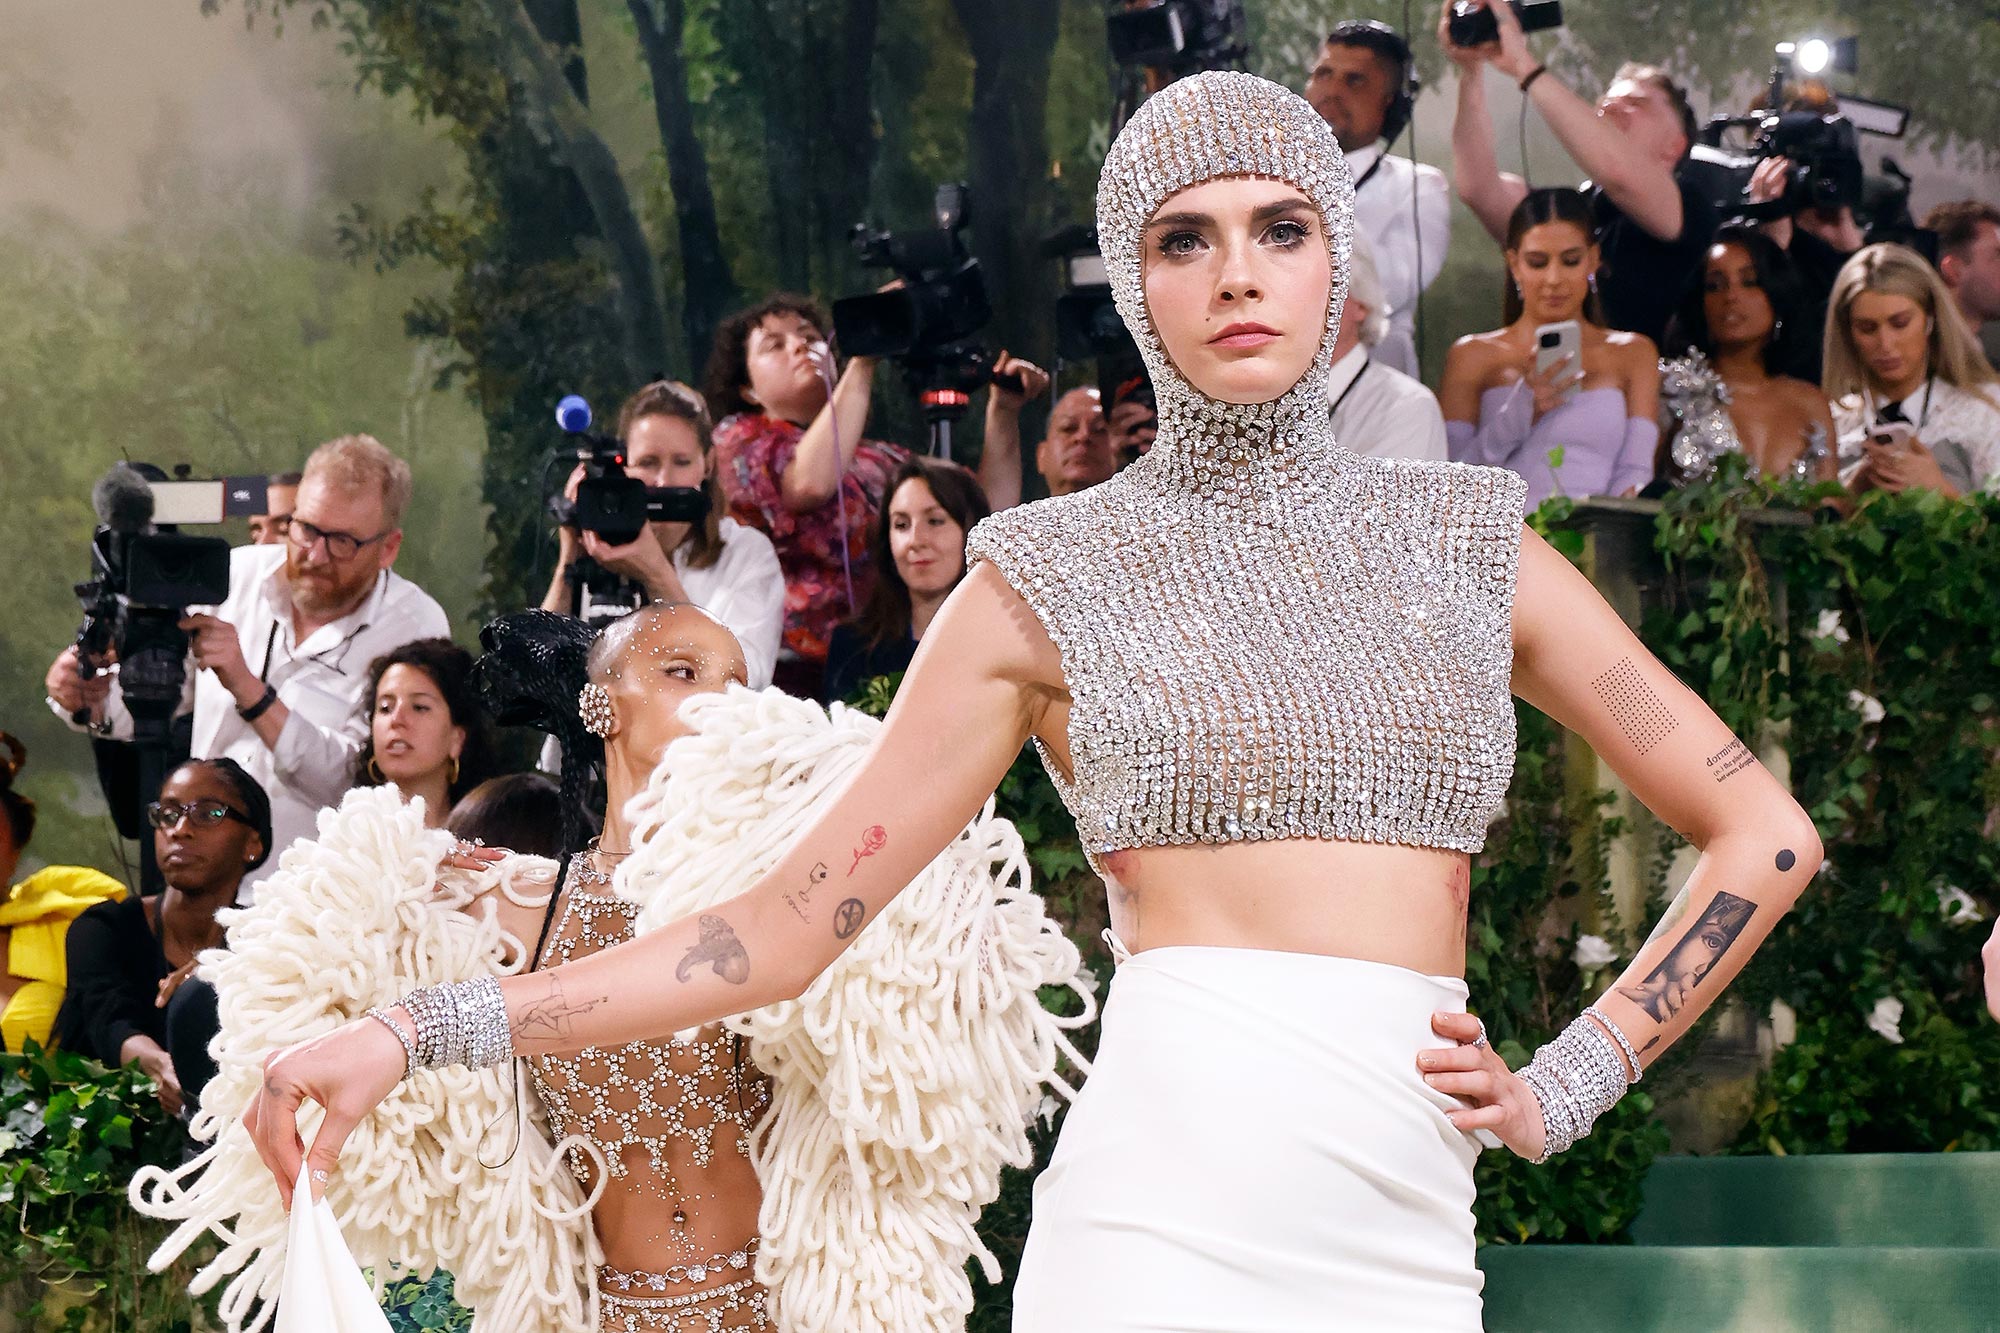 Cara Delevingne Opens Up About Her Sobriety: ‘If I Can Do It, Anyone Can’